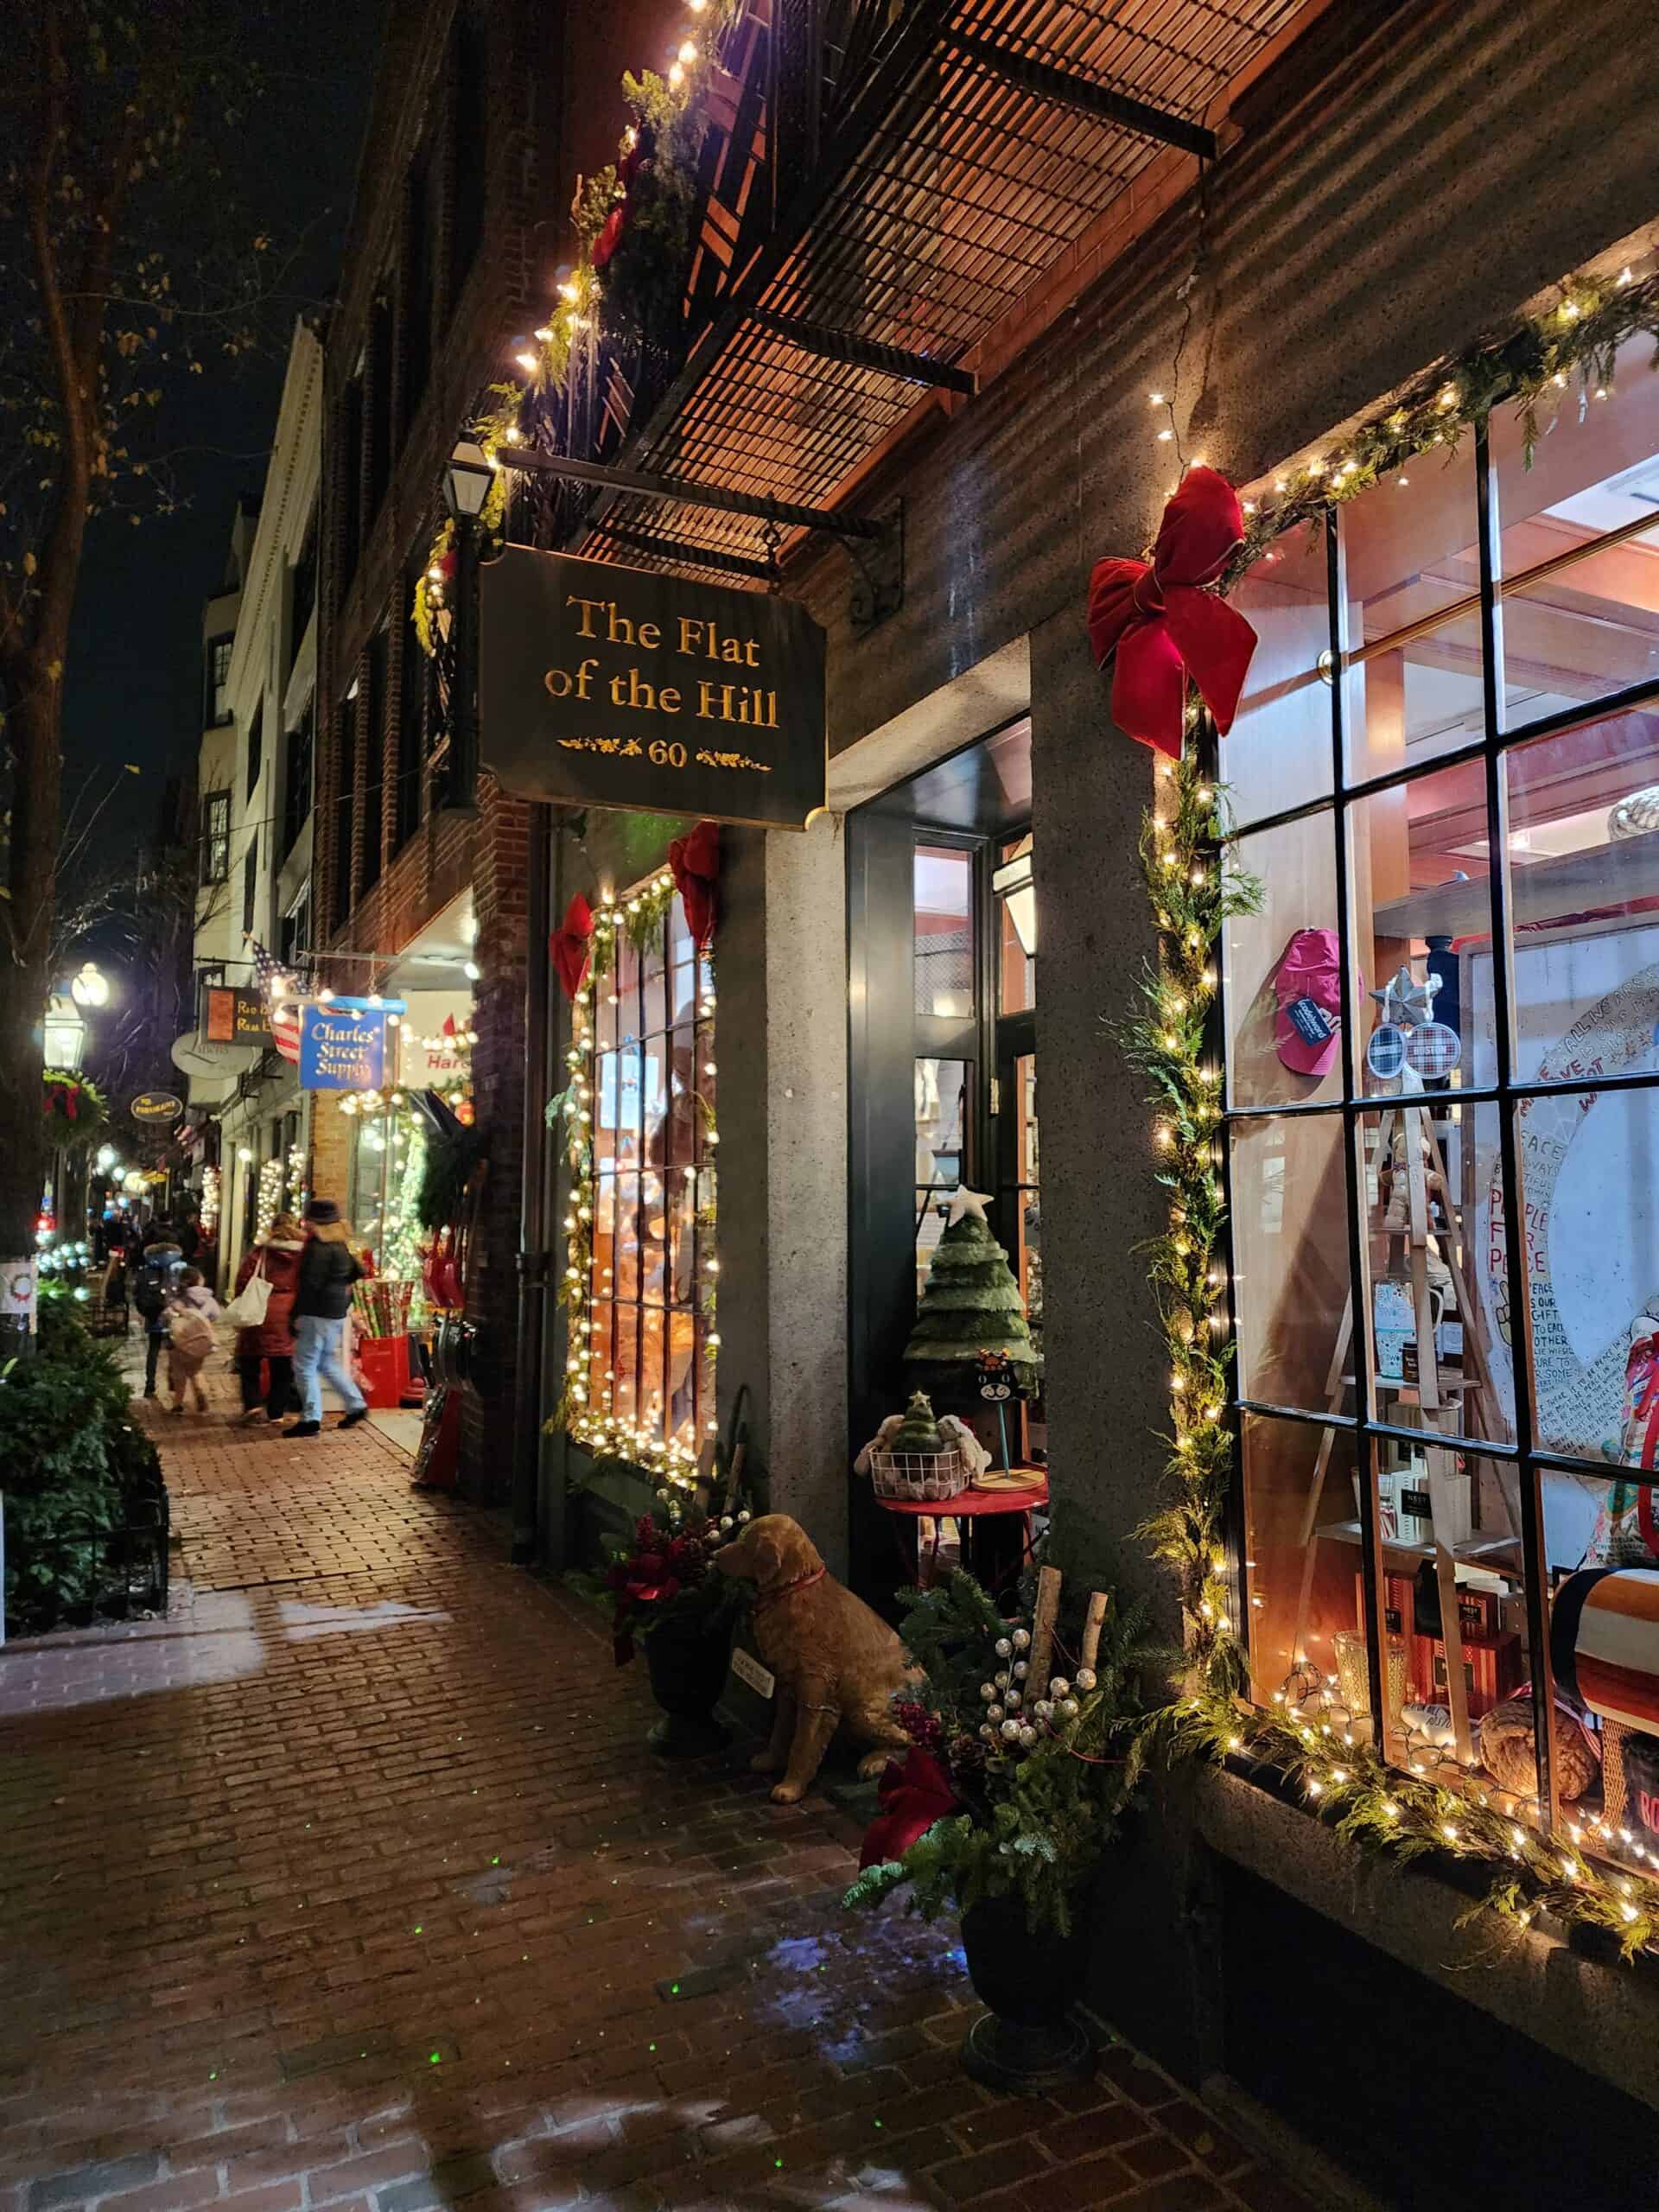 A festive street in Beacon hill Boston decorated for Christmas and lit up at night for the Christmas stroll